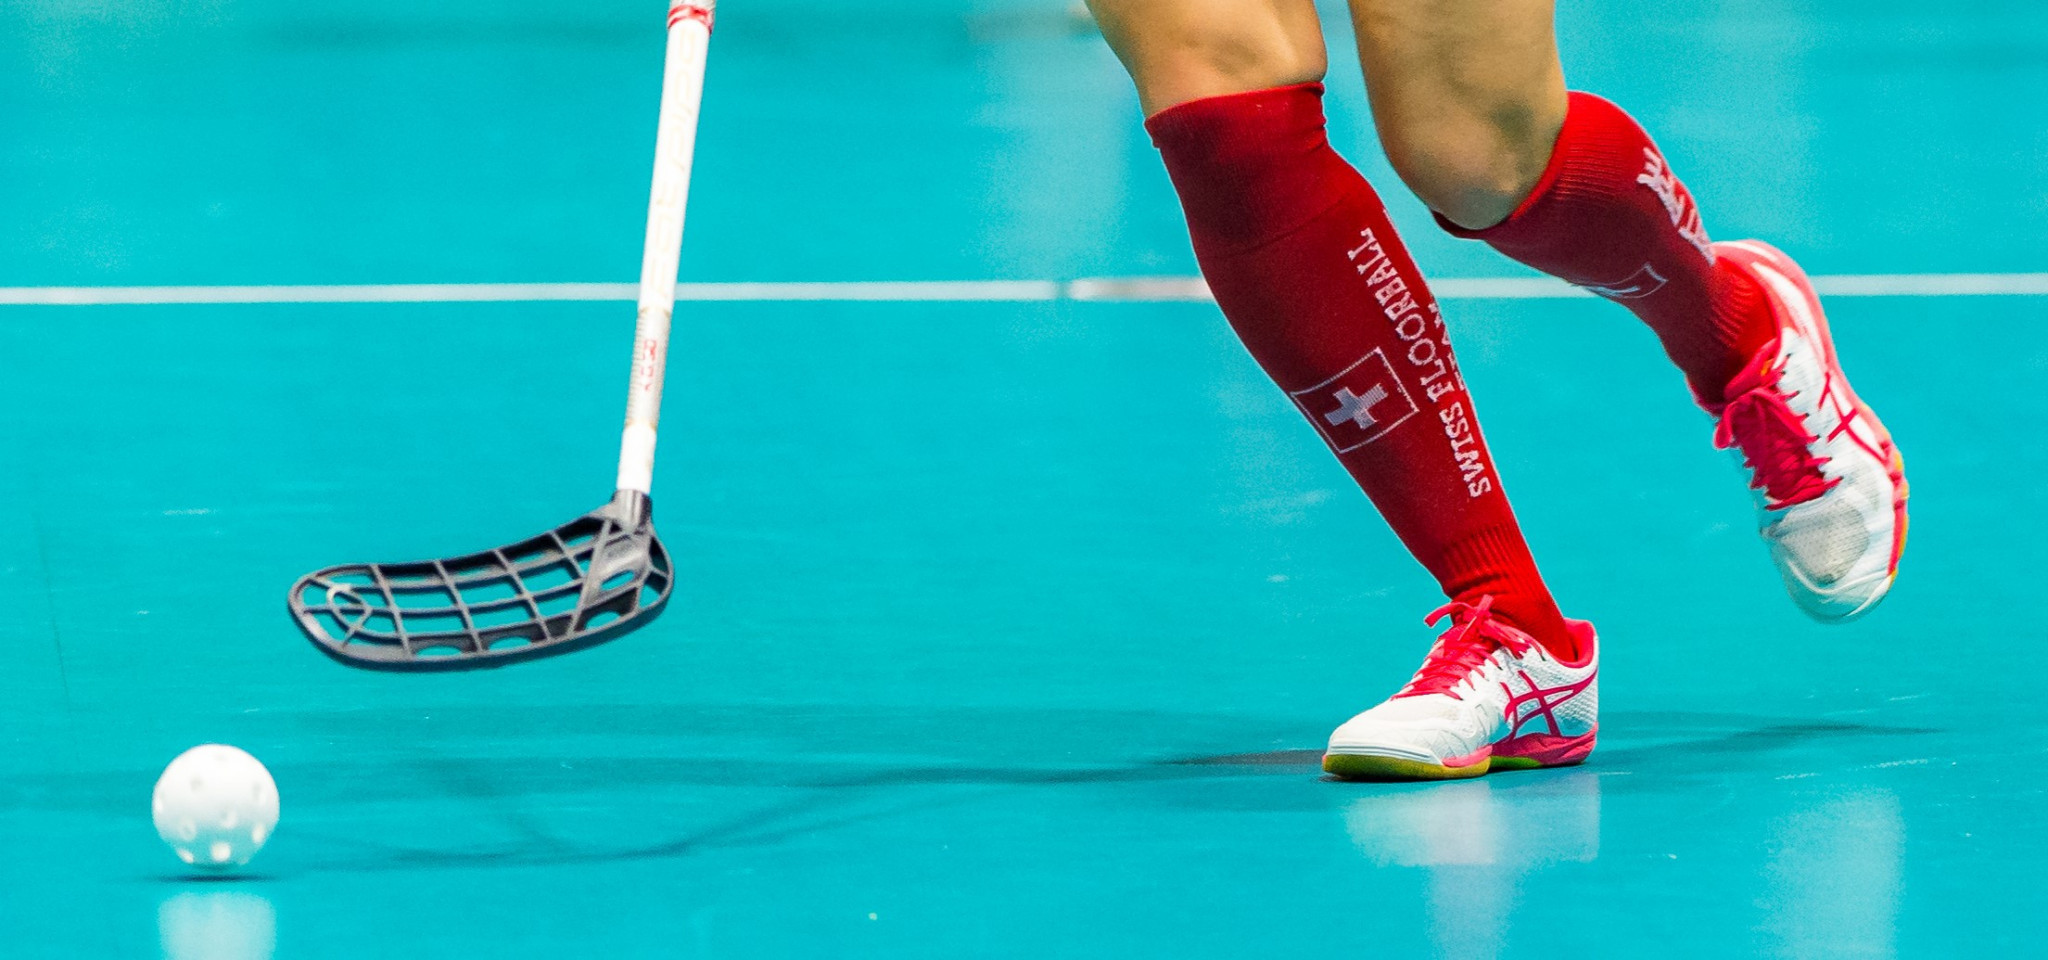 European qualifiers for Men's World Floorball Championship set for Latvia and Italy